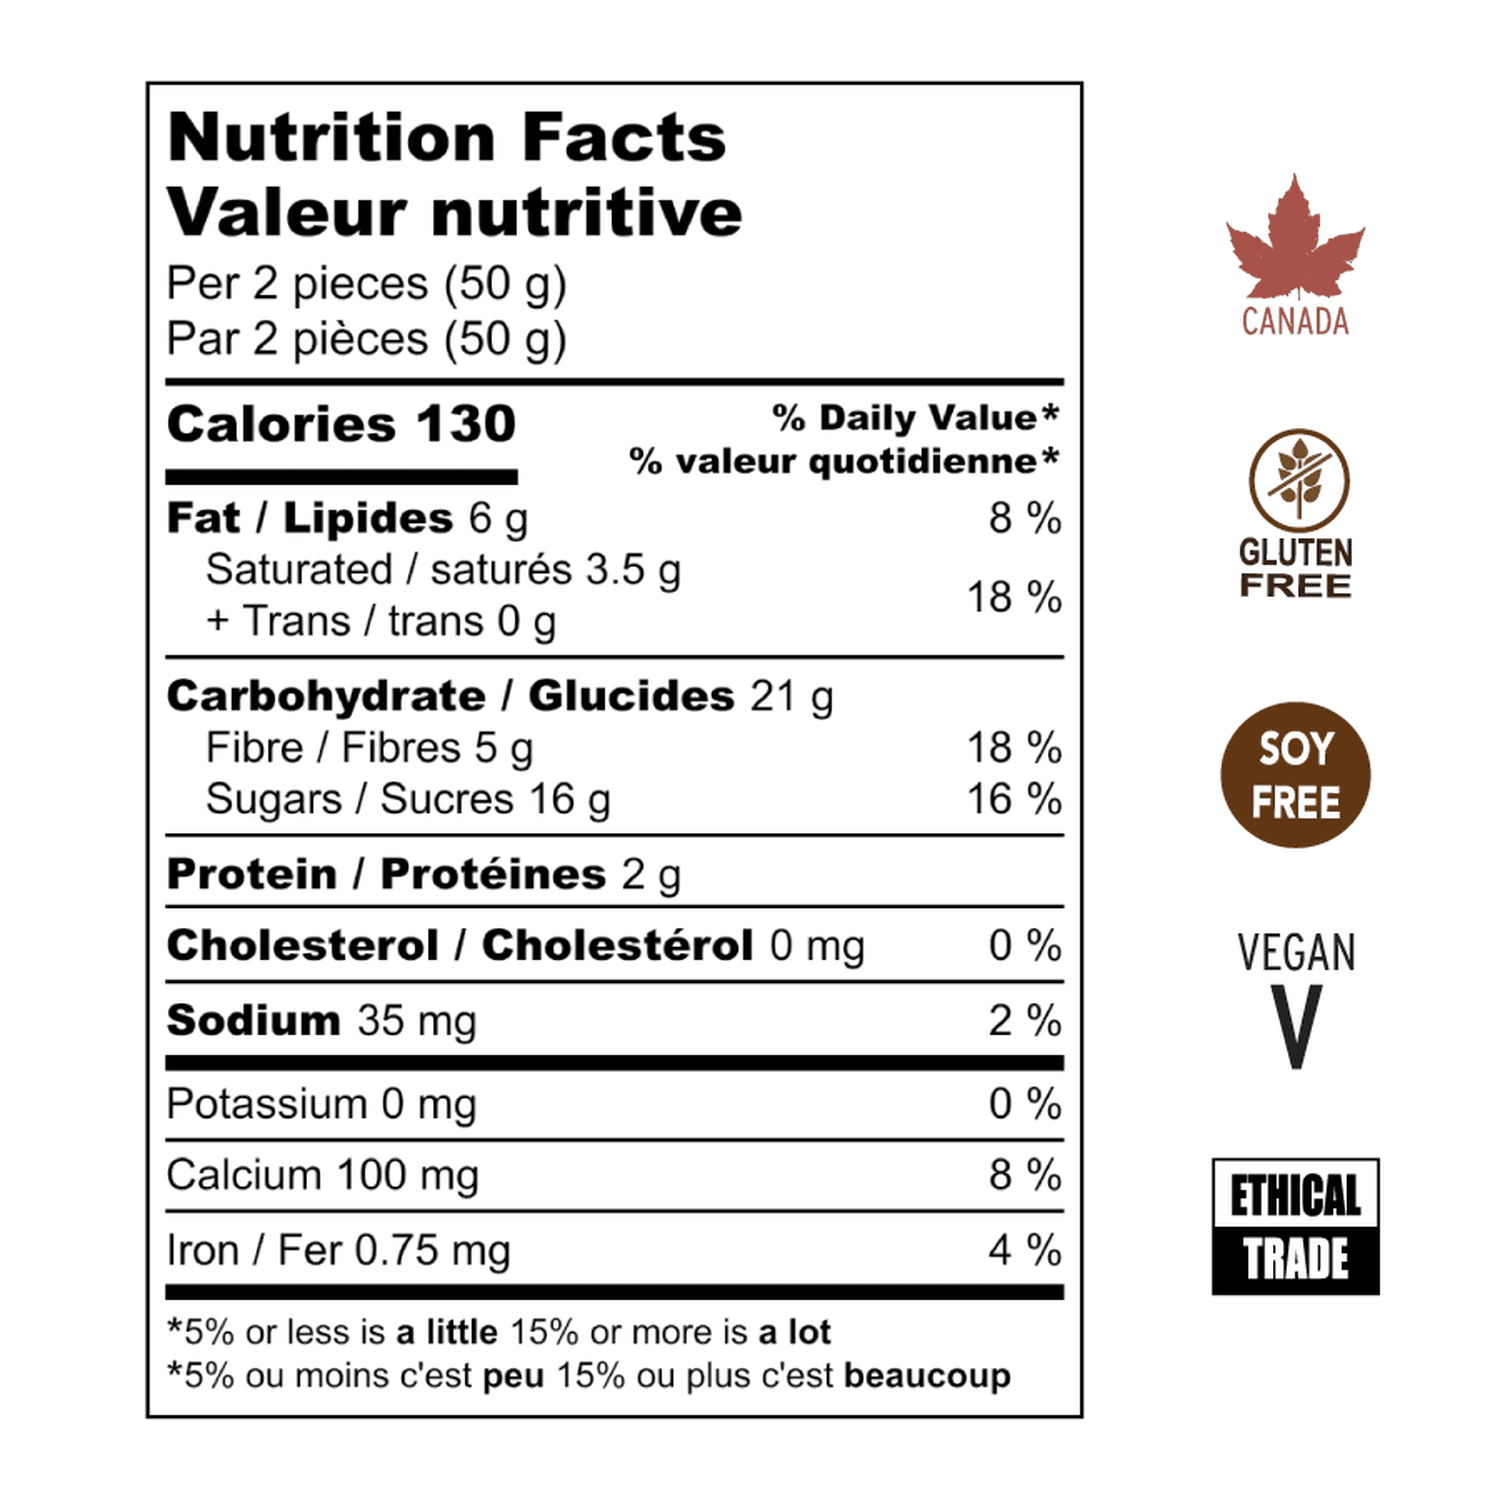 Nutritional Facts for Chocolate Covered Orange Slices. Gluten Free, Soy Free, Vegan, Ethical Trade, Made in Canada. 